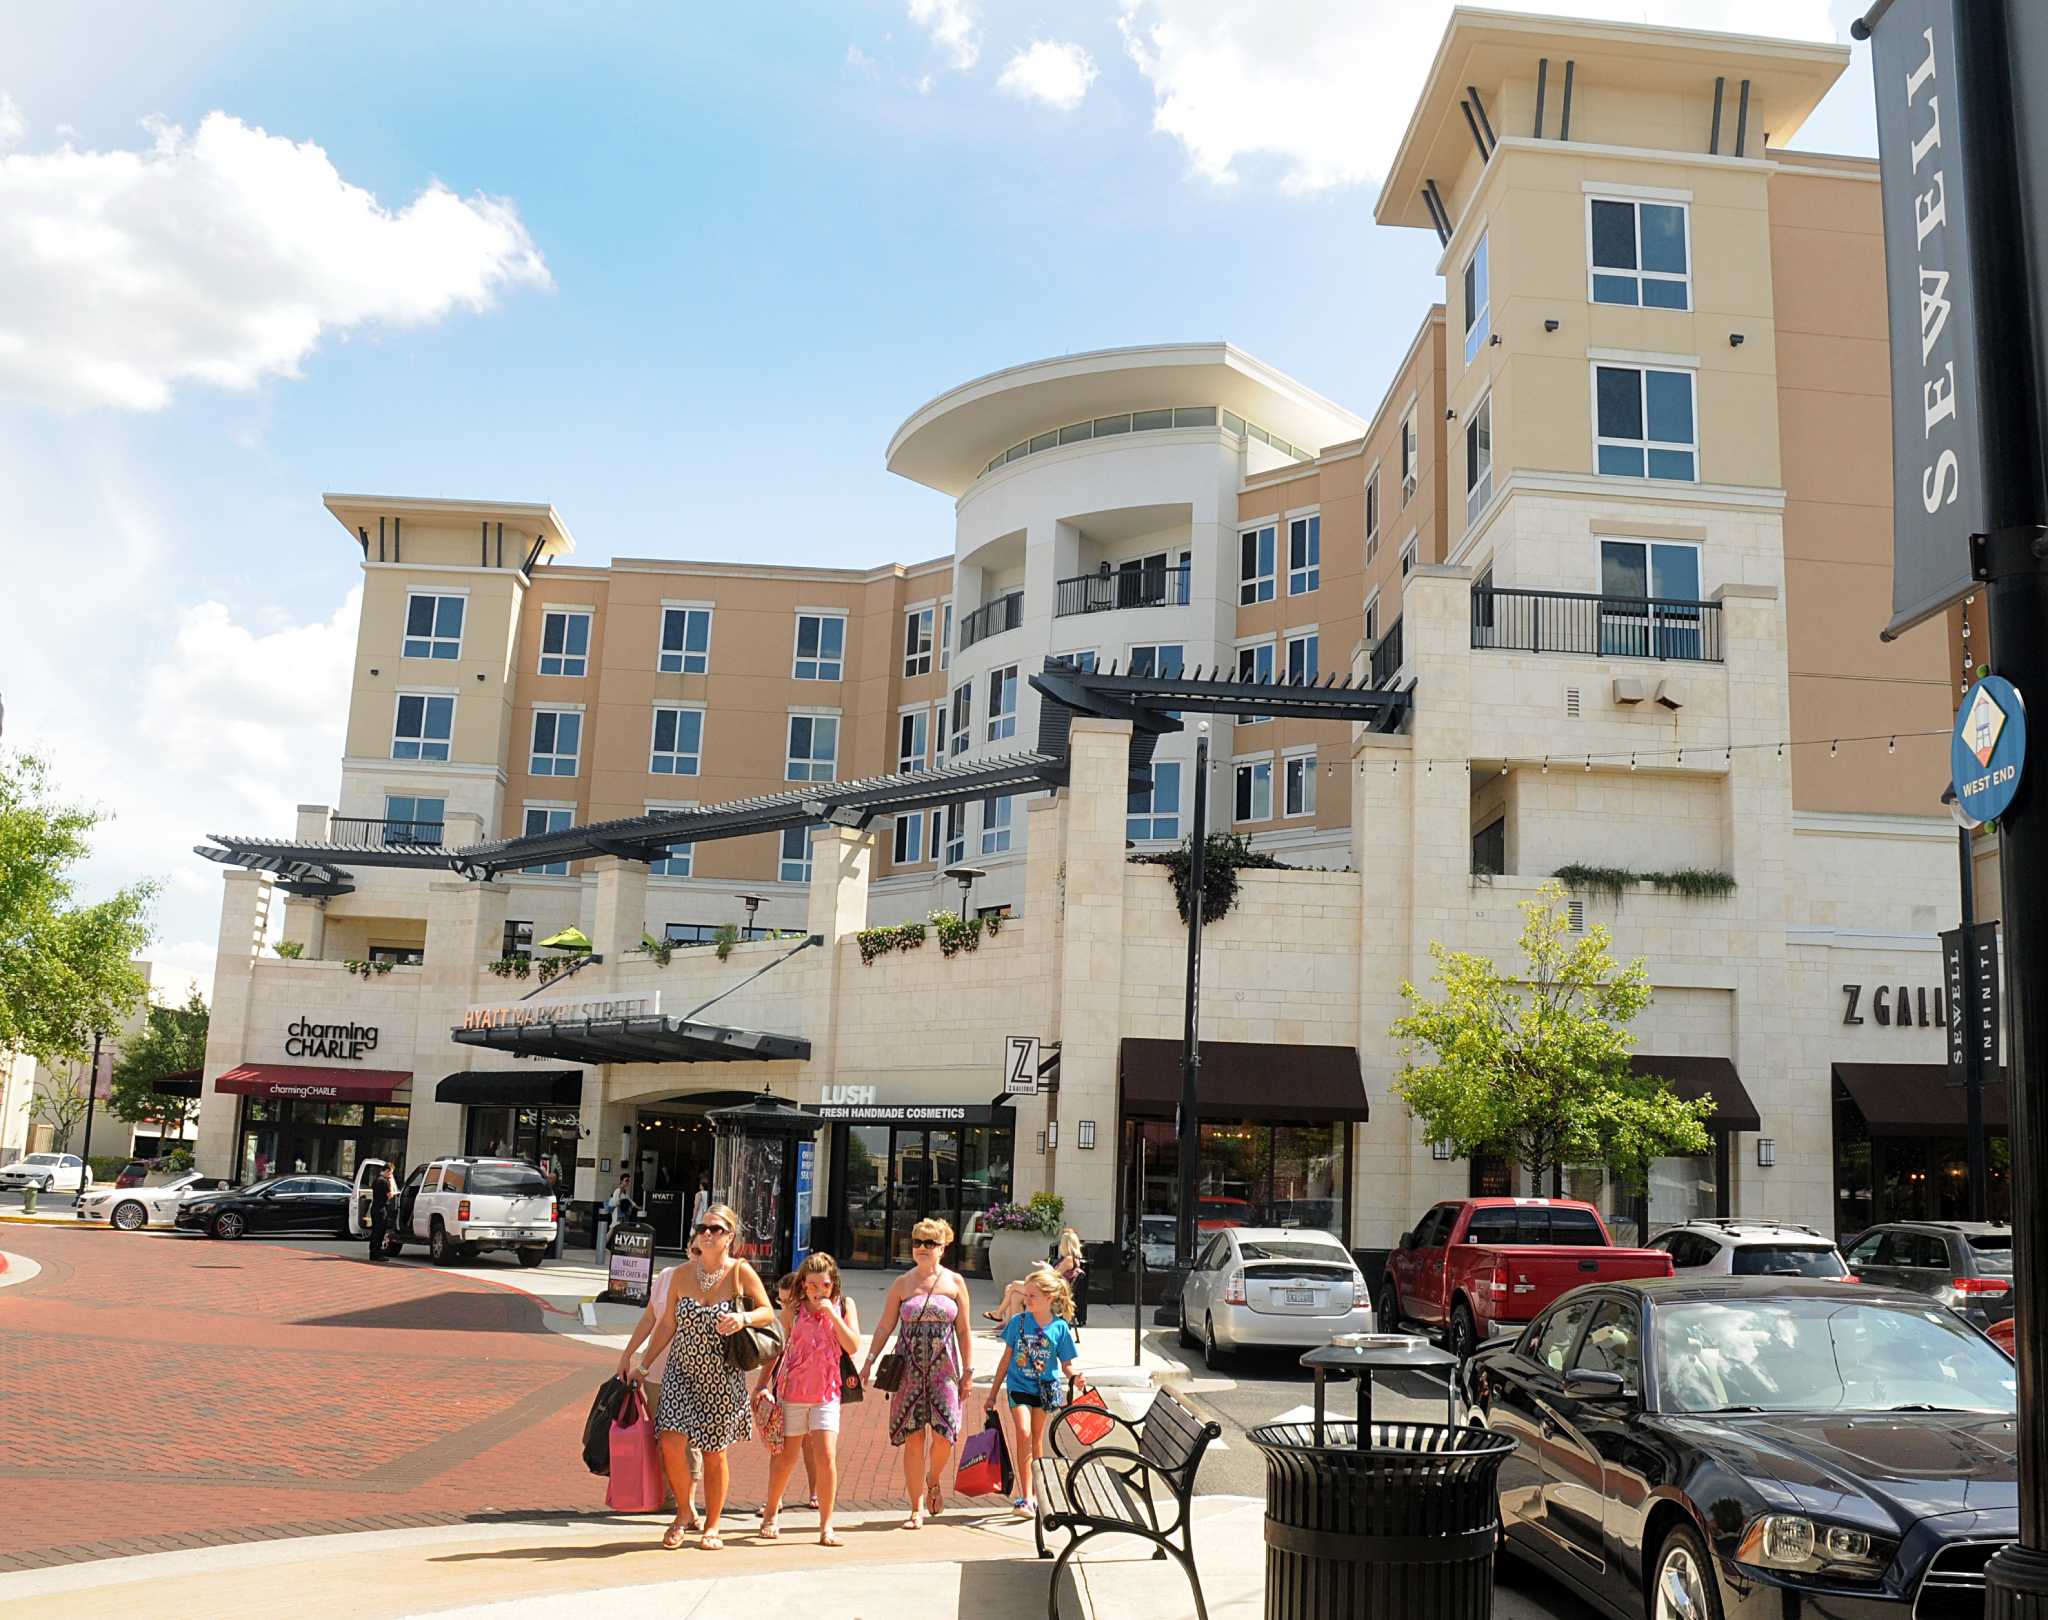 Makeover planned for Market Street in The Woodlands